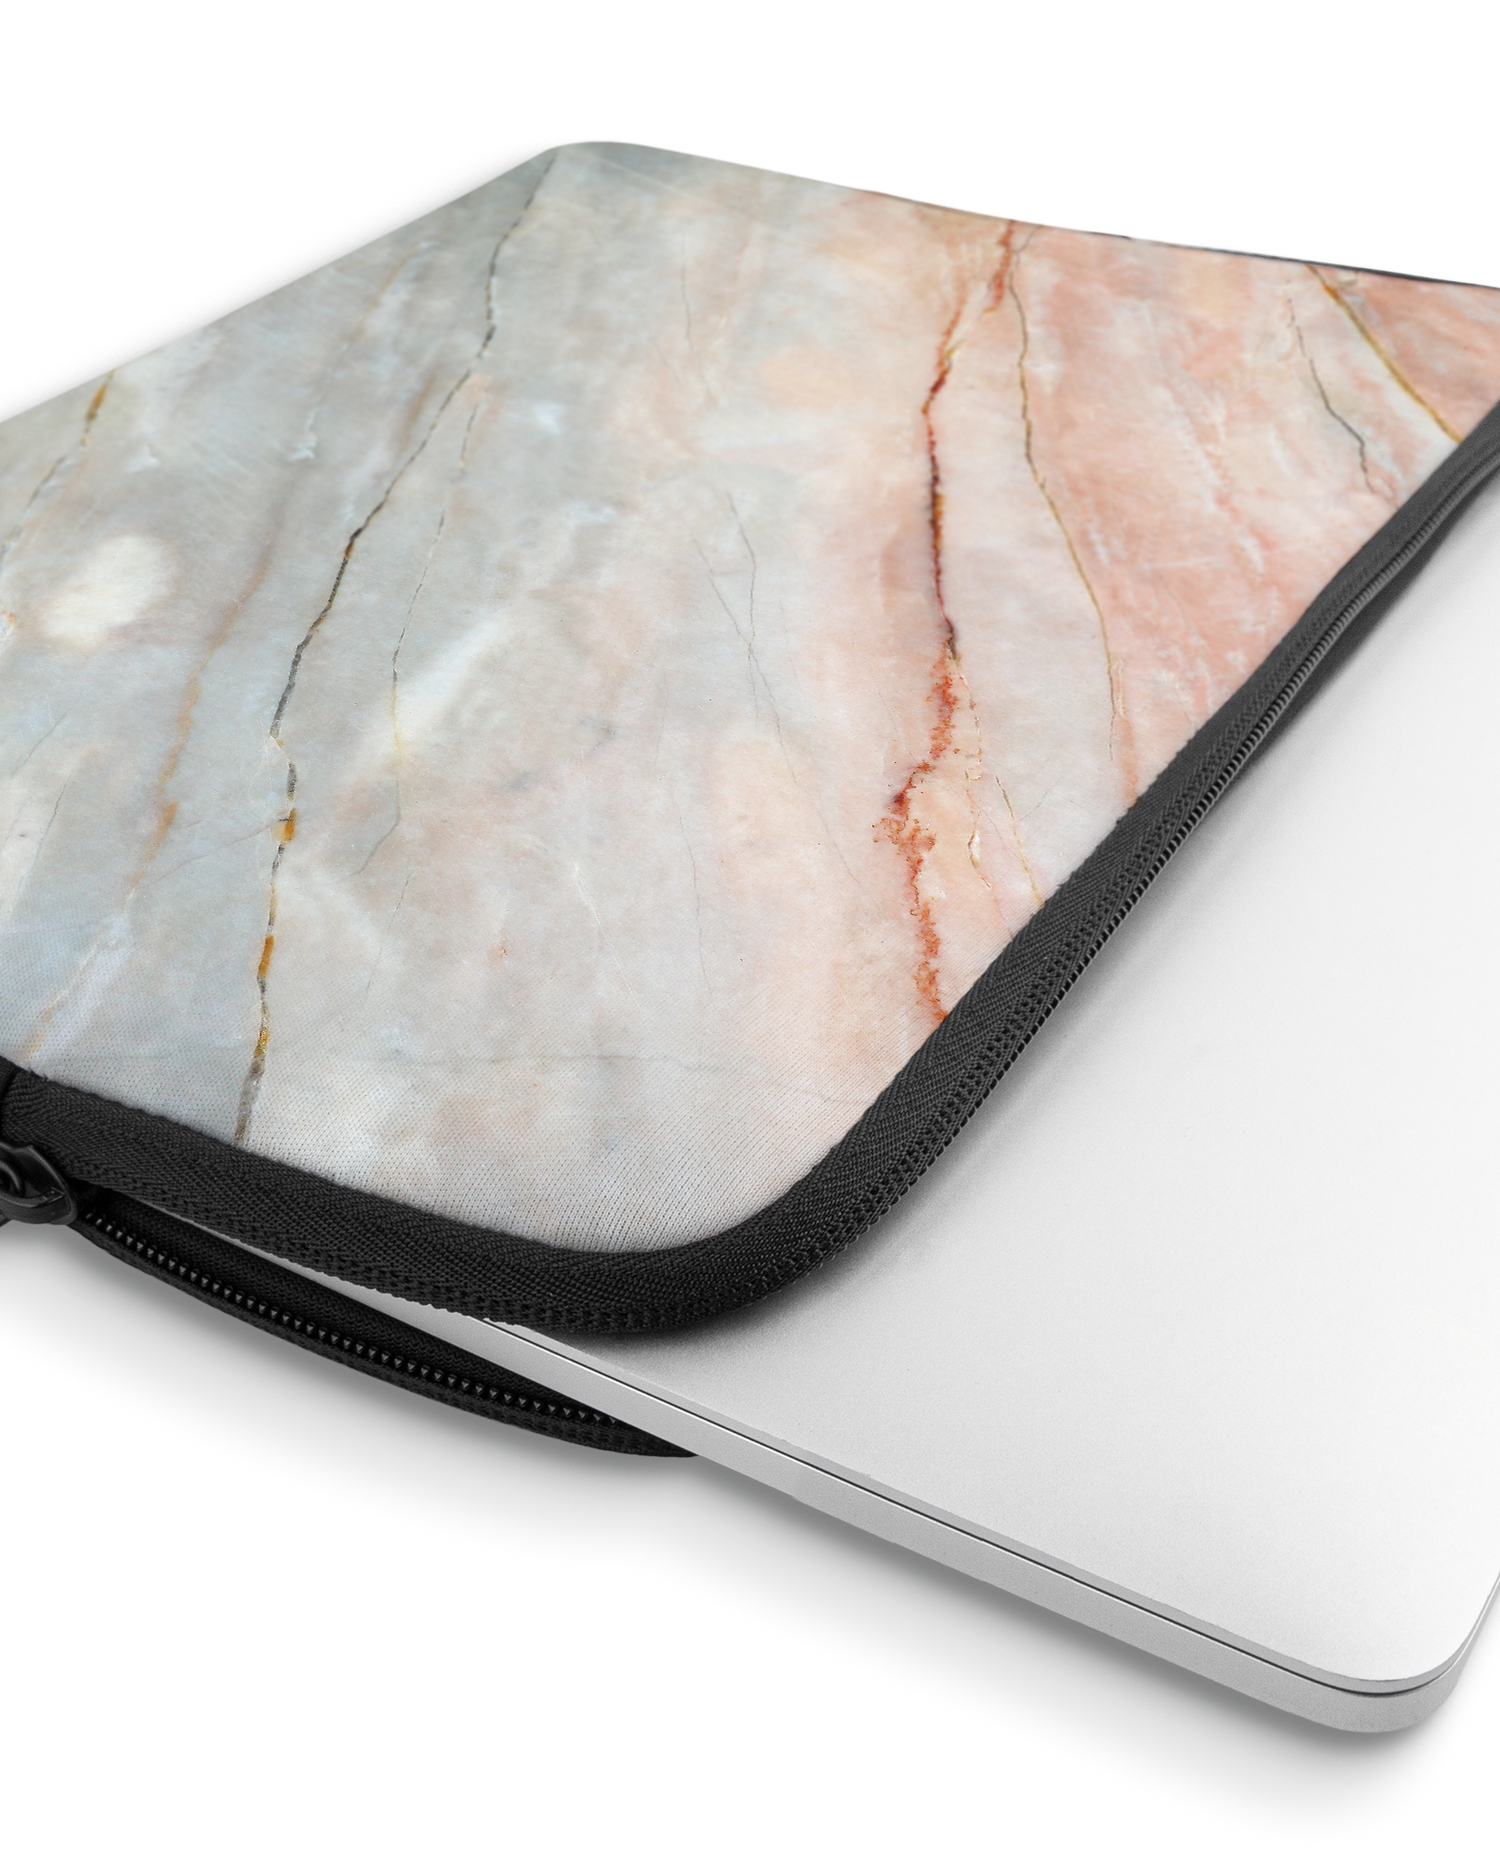 Mother of Pearl Marble Laptop Case 13 inch with device inside